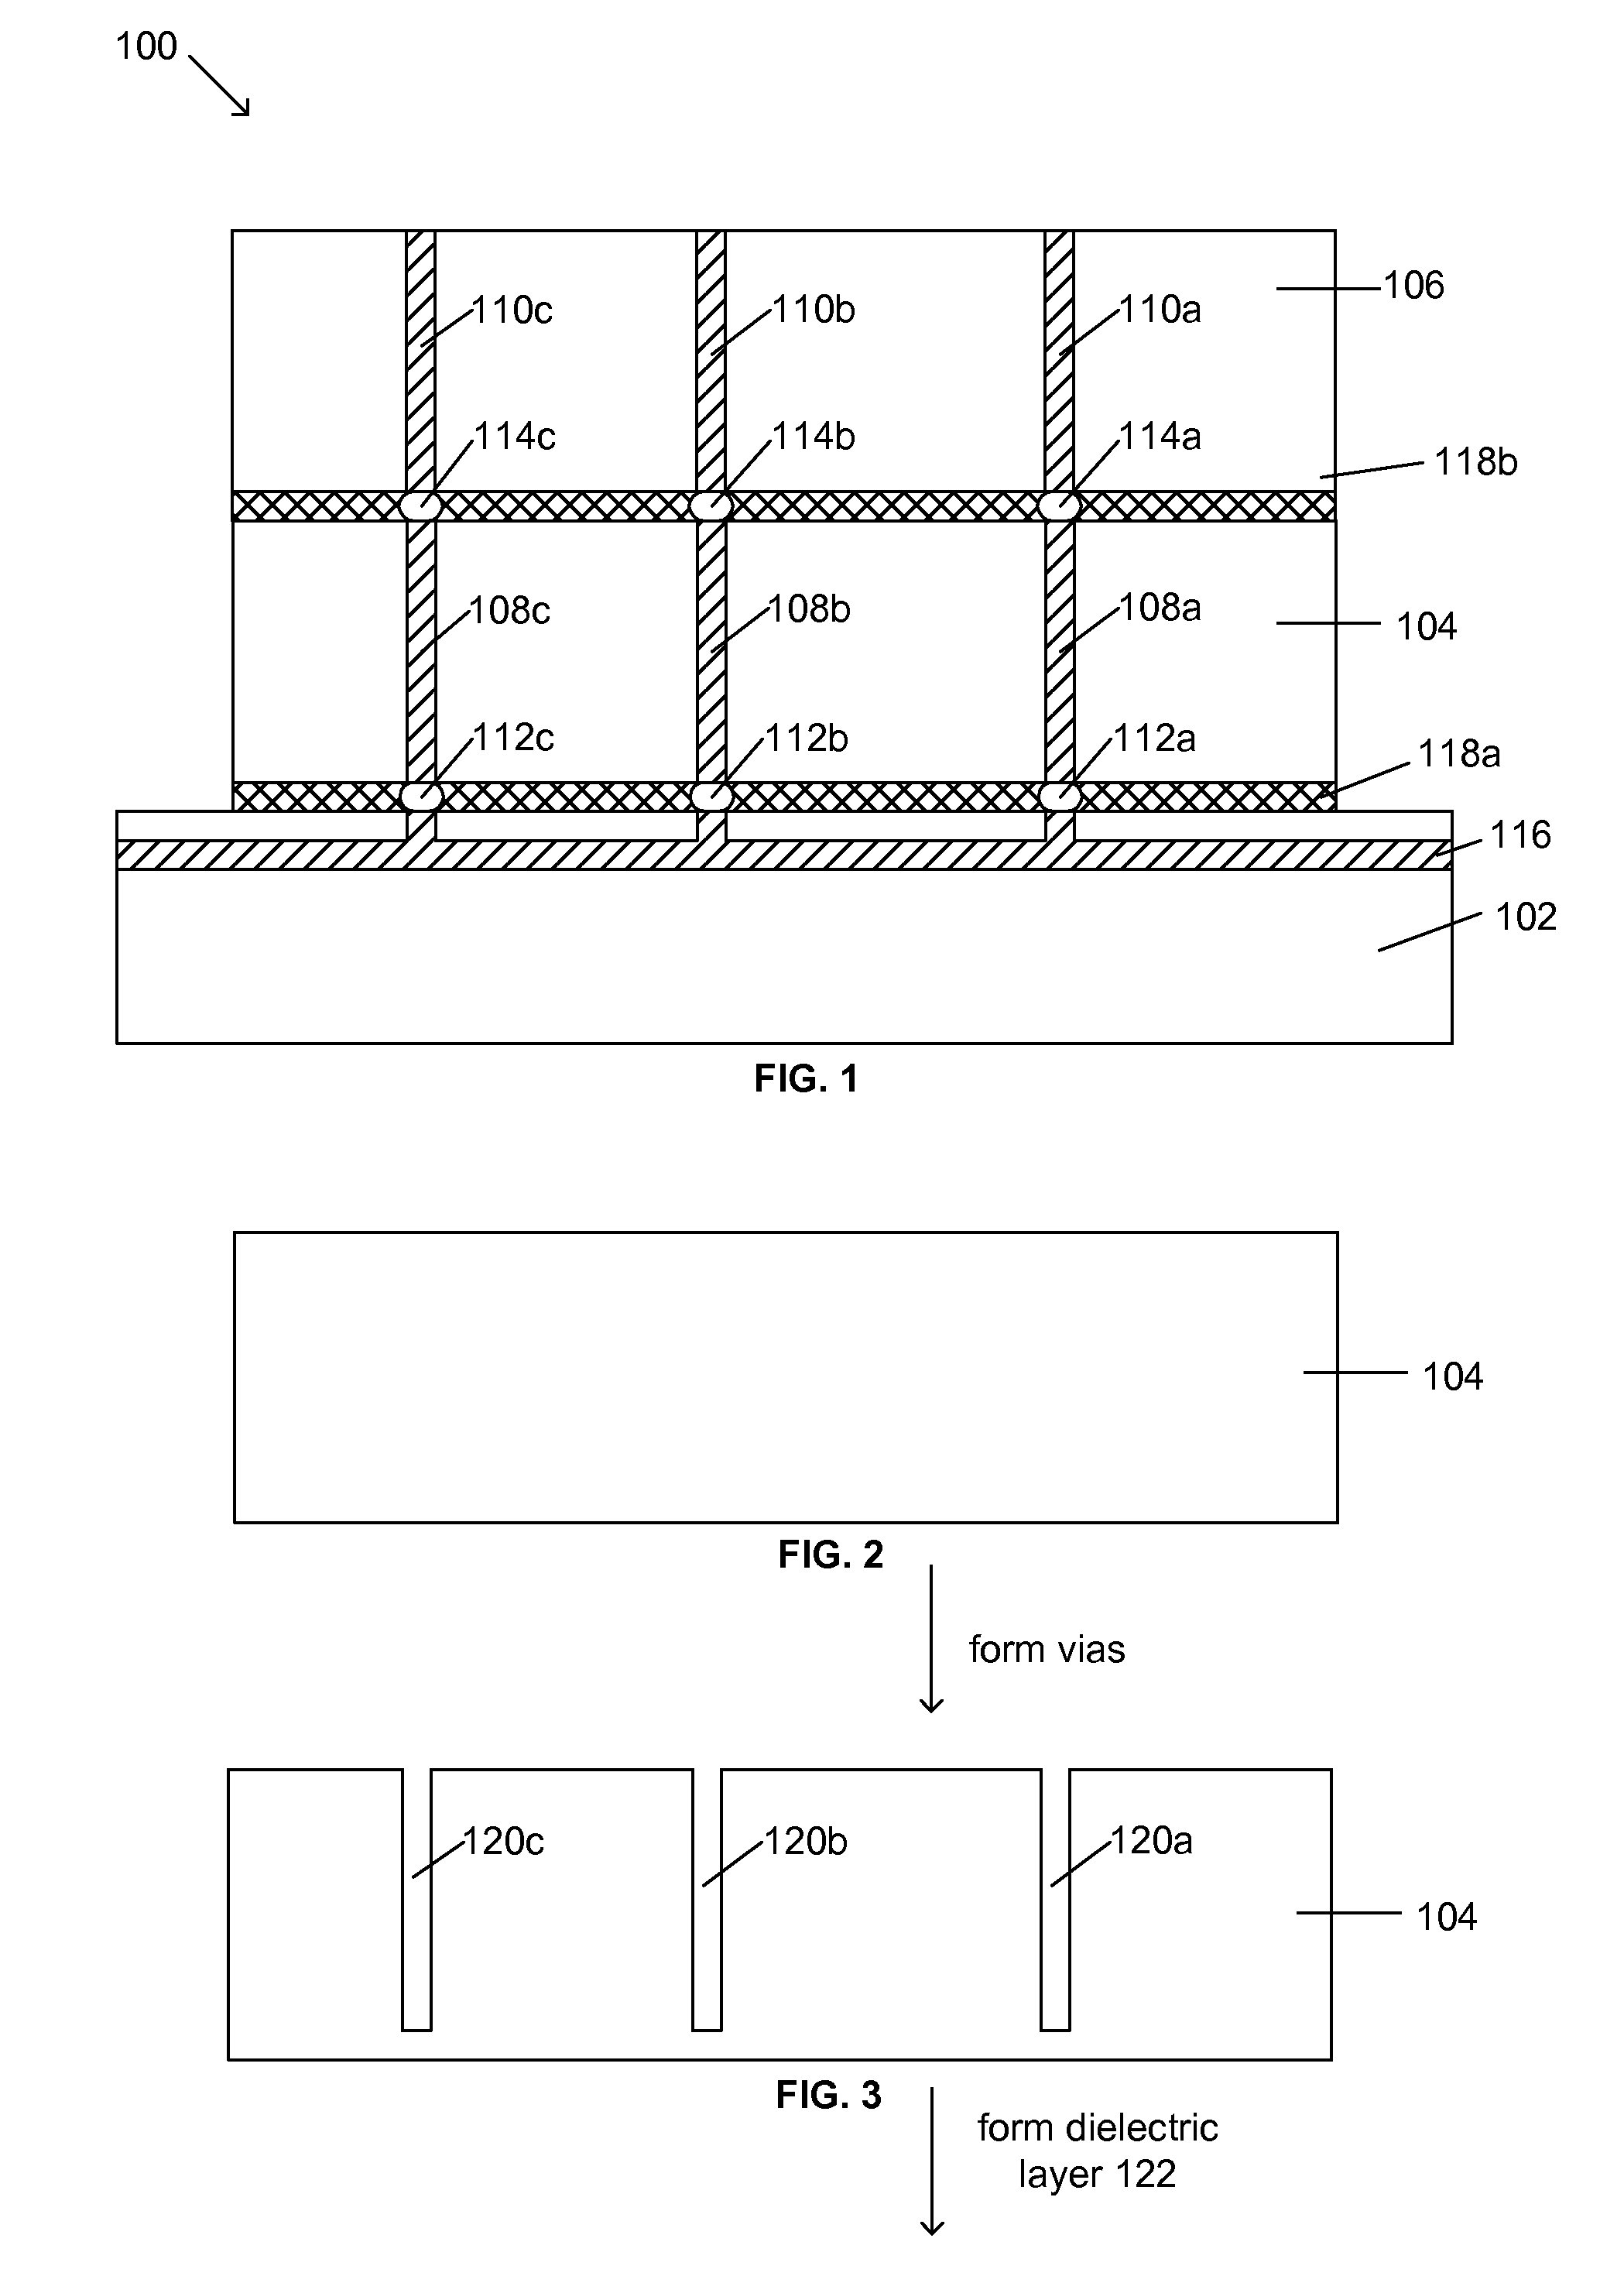 Process for electrodeposition of copper chip to chip, chip to wafer and wafer to wafer interconnects in through-silicon vias (TSV)